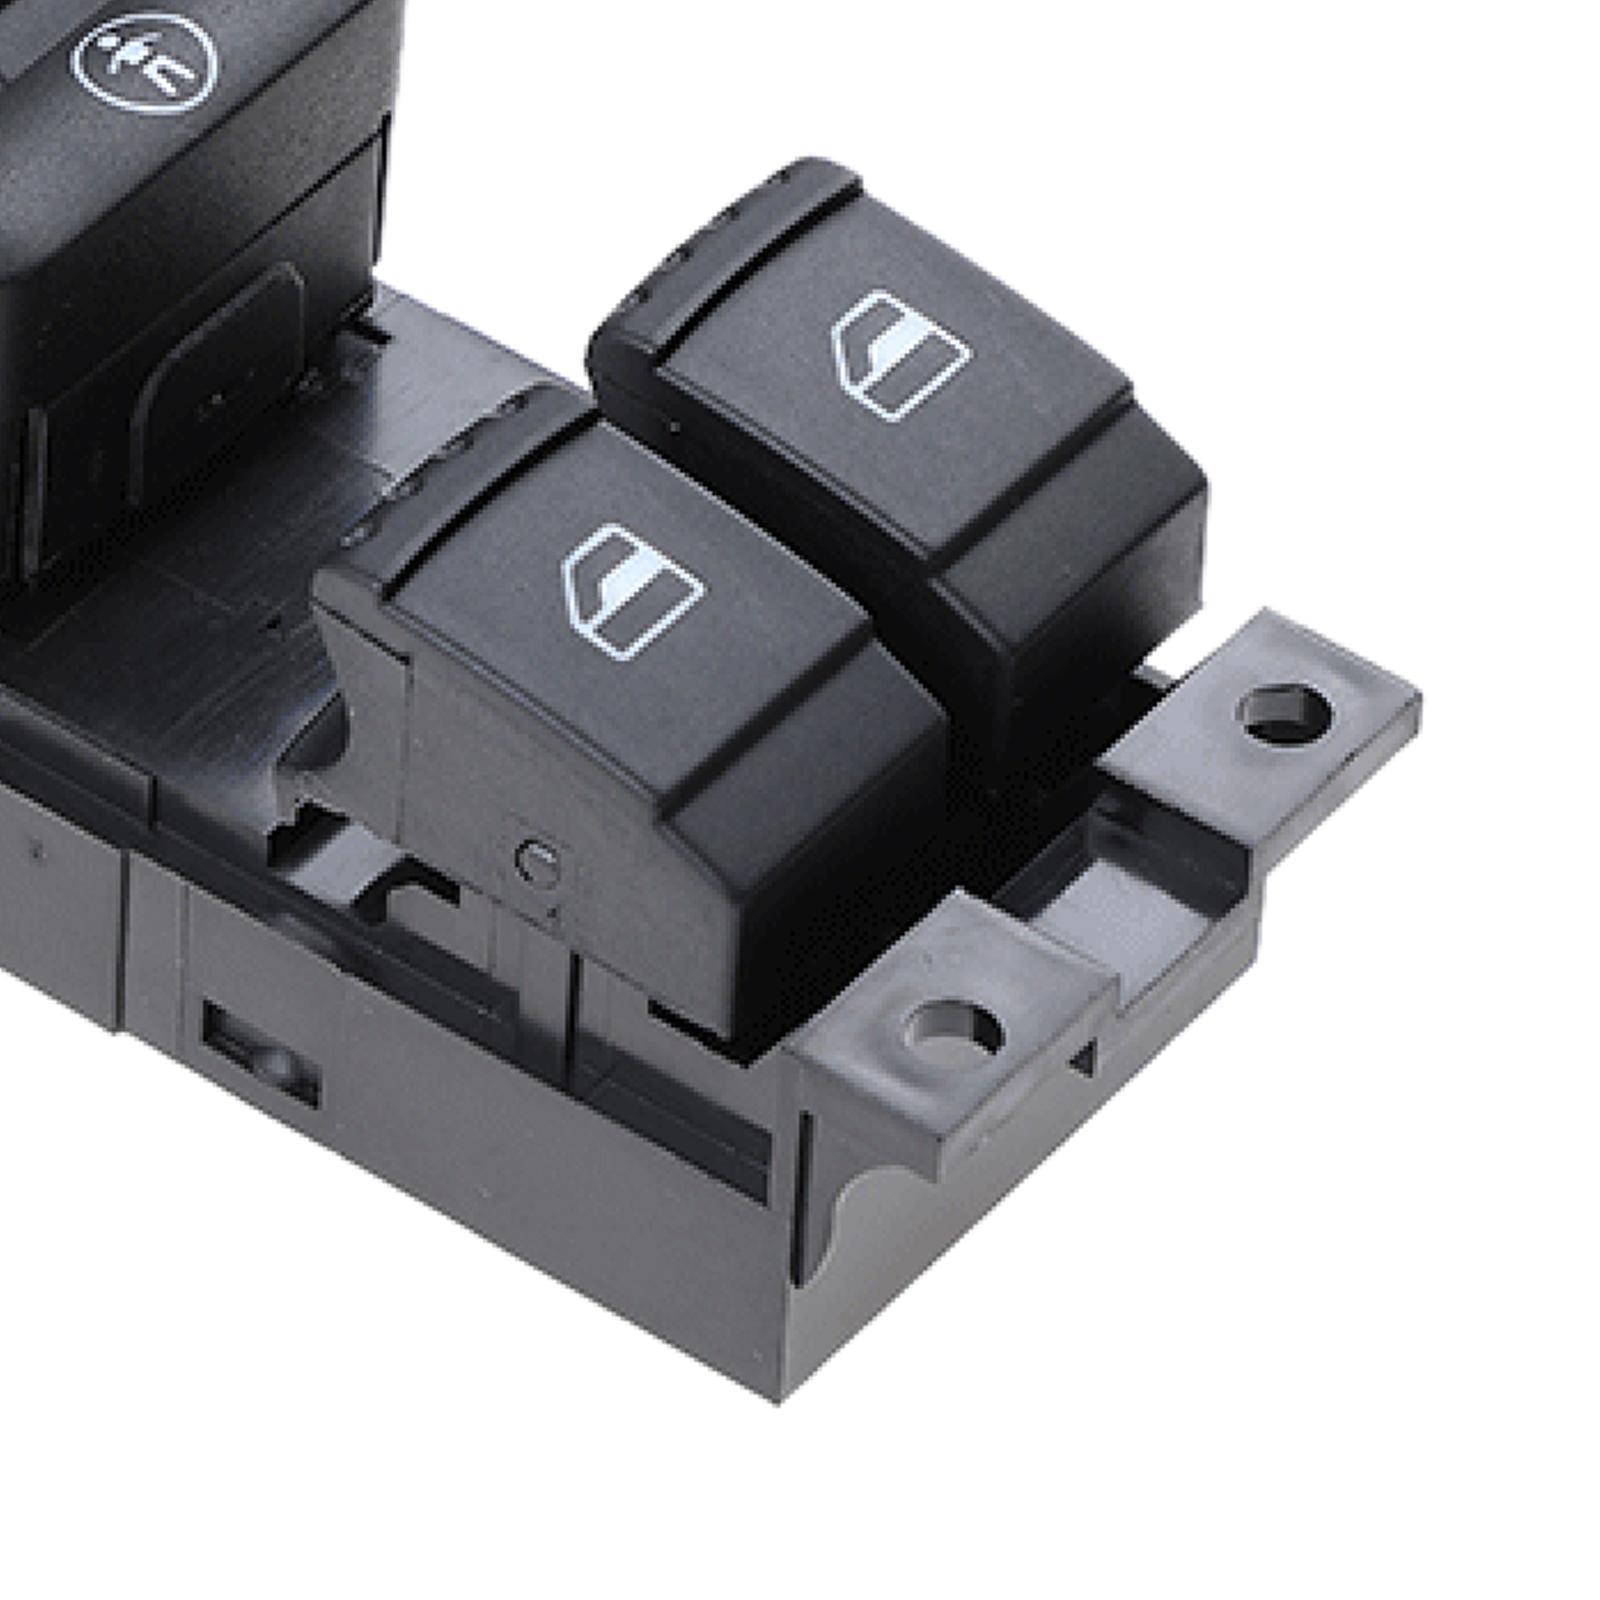 1J4959857A Electric Power Window Switch Premium Durable Spare Parts Replaces Window Switch Button Power Window Switch